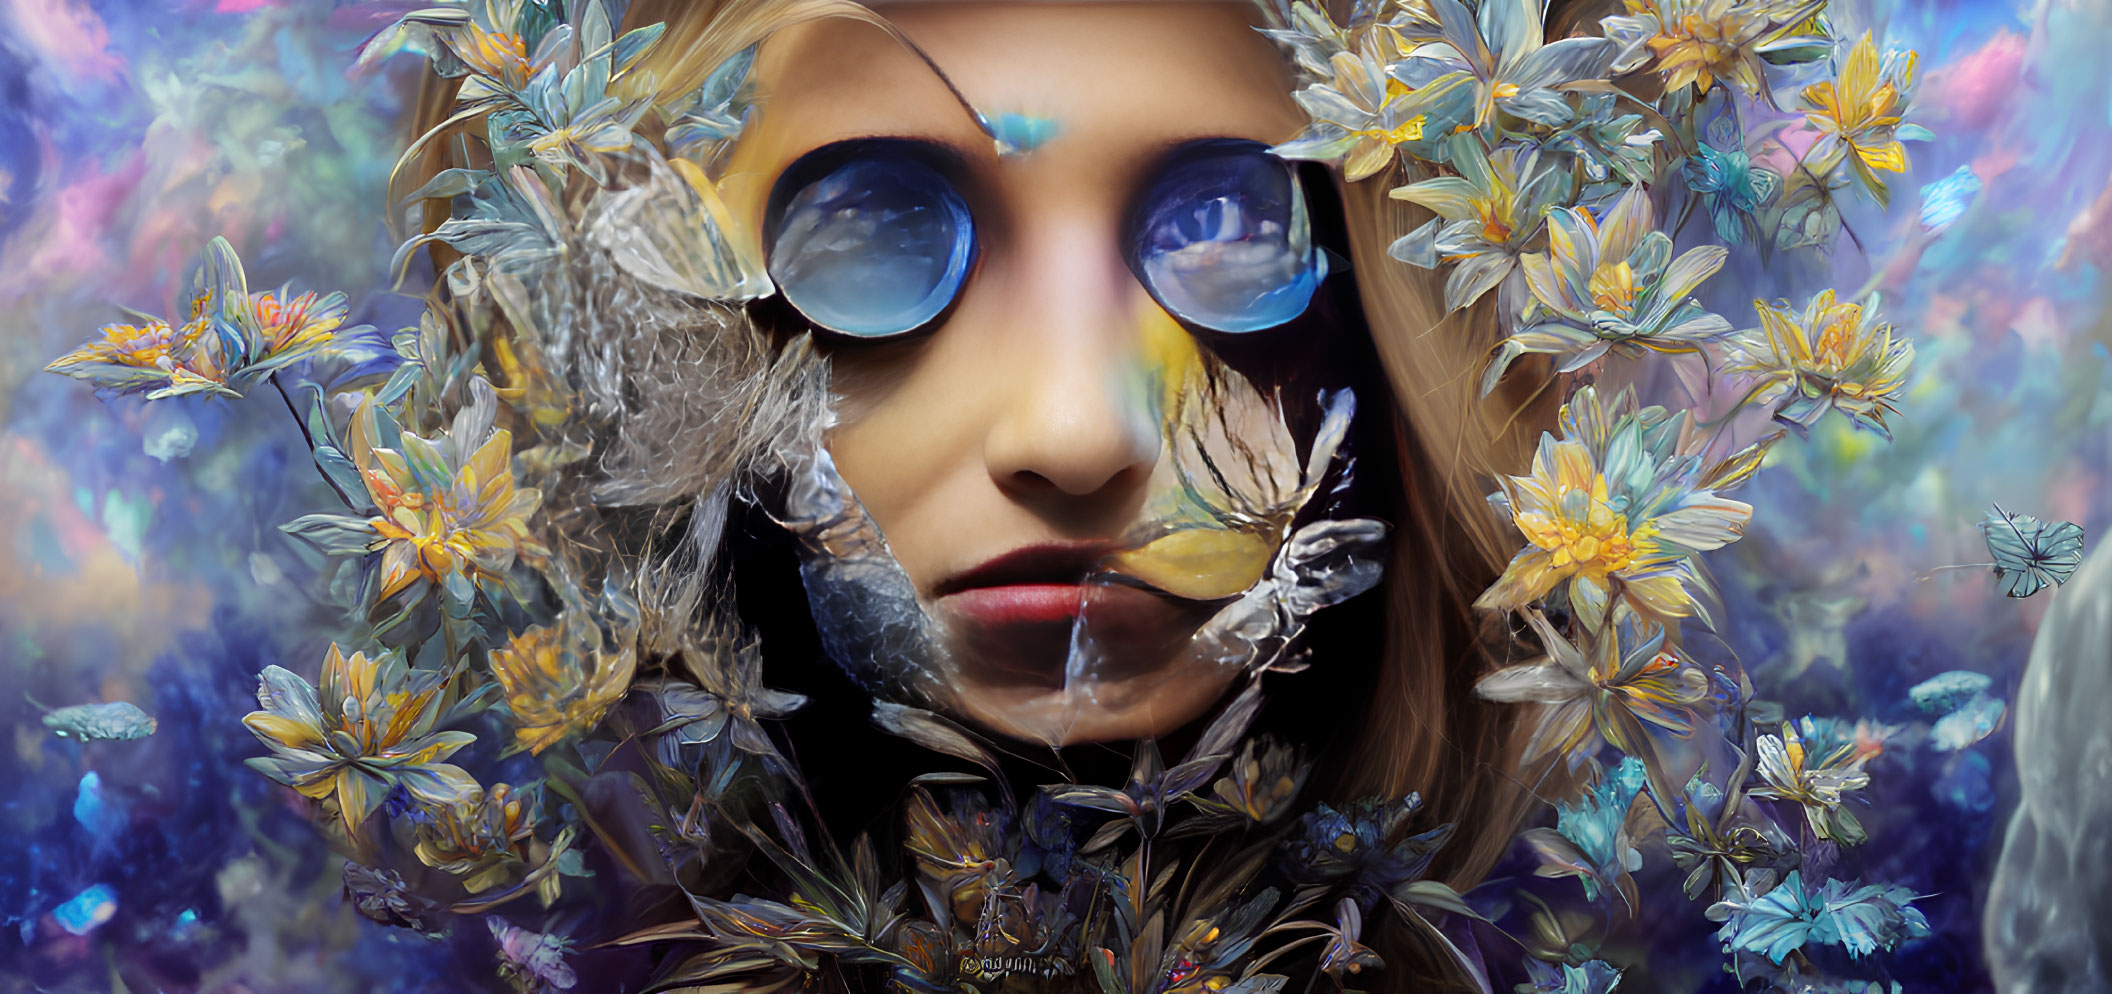 Colorful surreal portrait with large round glasses and floral motif.